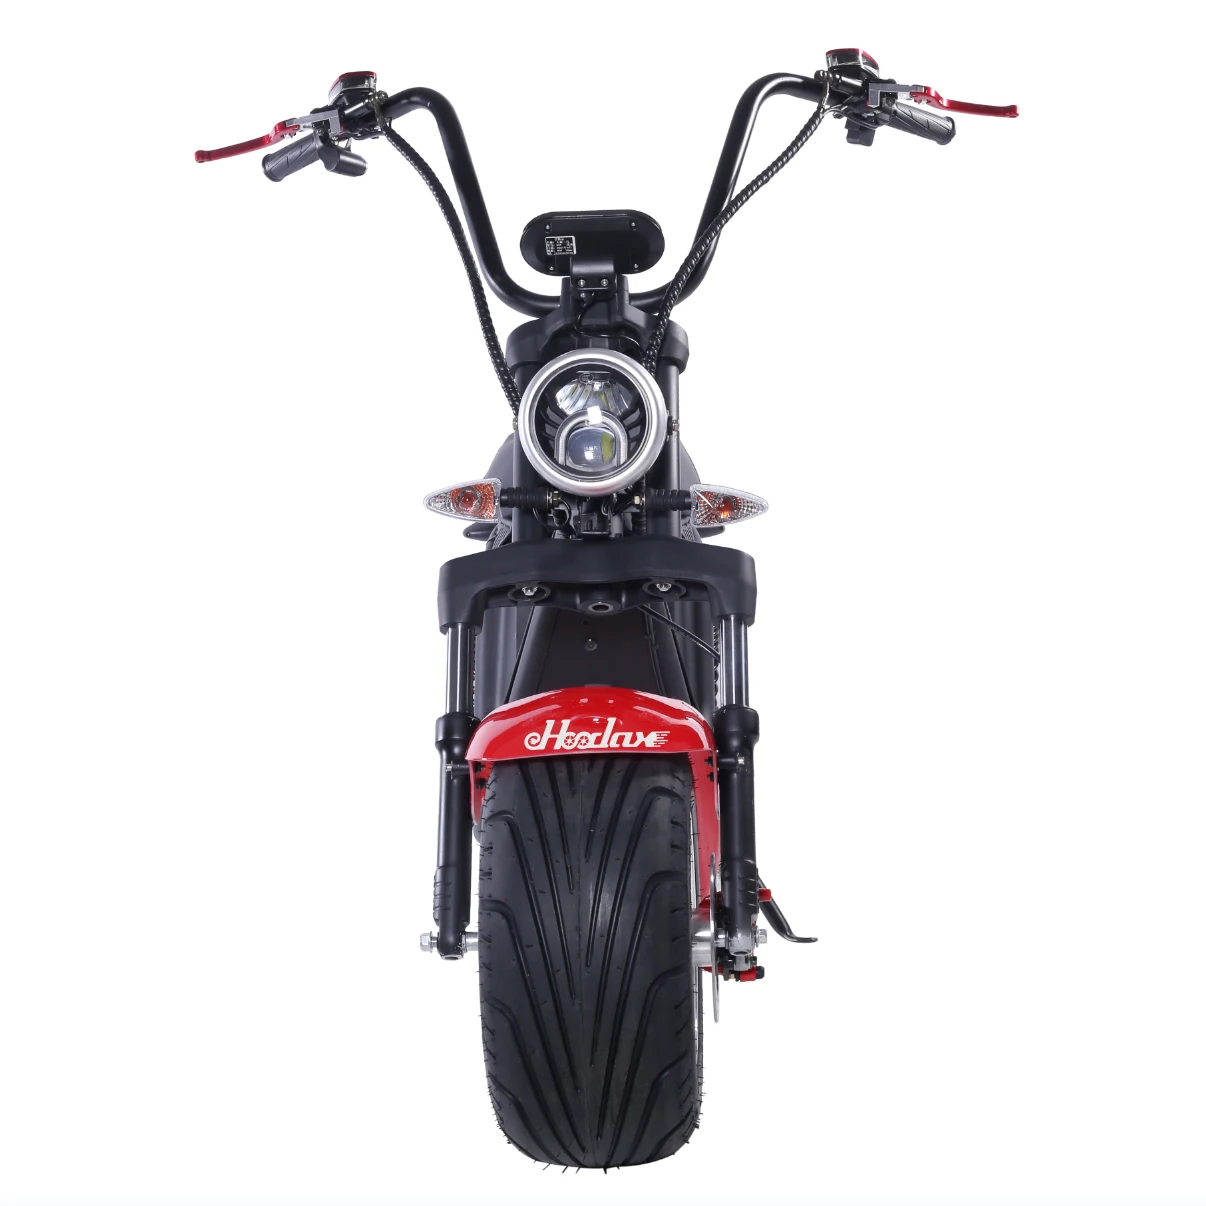 

Citycoco 2021 New Chopper style Electric Scooter 1500W/2000W/2500W 60V 12AH/20AH Powerful Motorcycle, Black and red